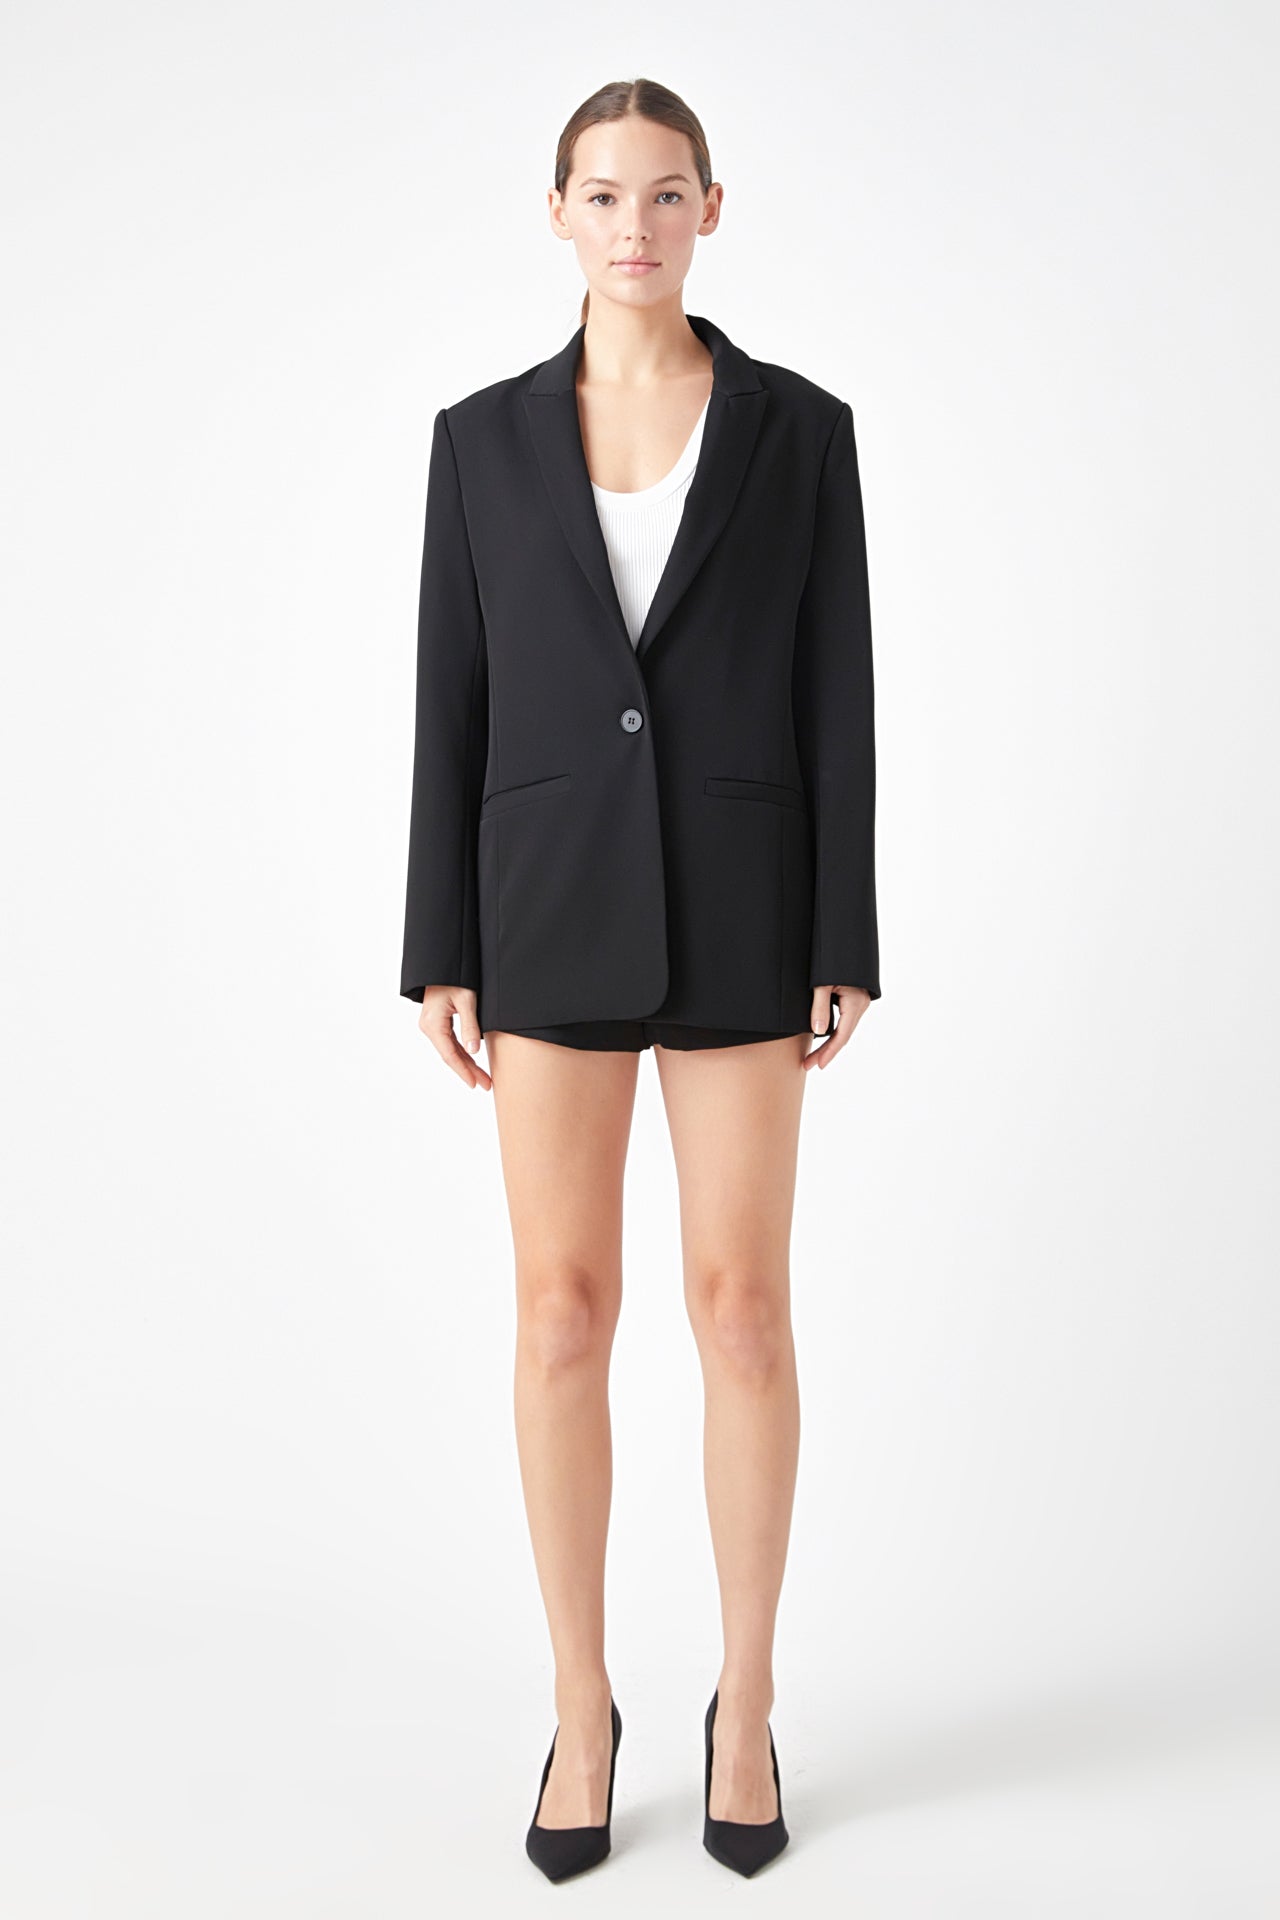 Buy Black Pantsuit for Women, Black Formal Pants Suit for Women, Black  Pantsuit Set With Trousers and Blazer Single Breasted, Formal Womens Wear  Online in India 